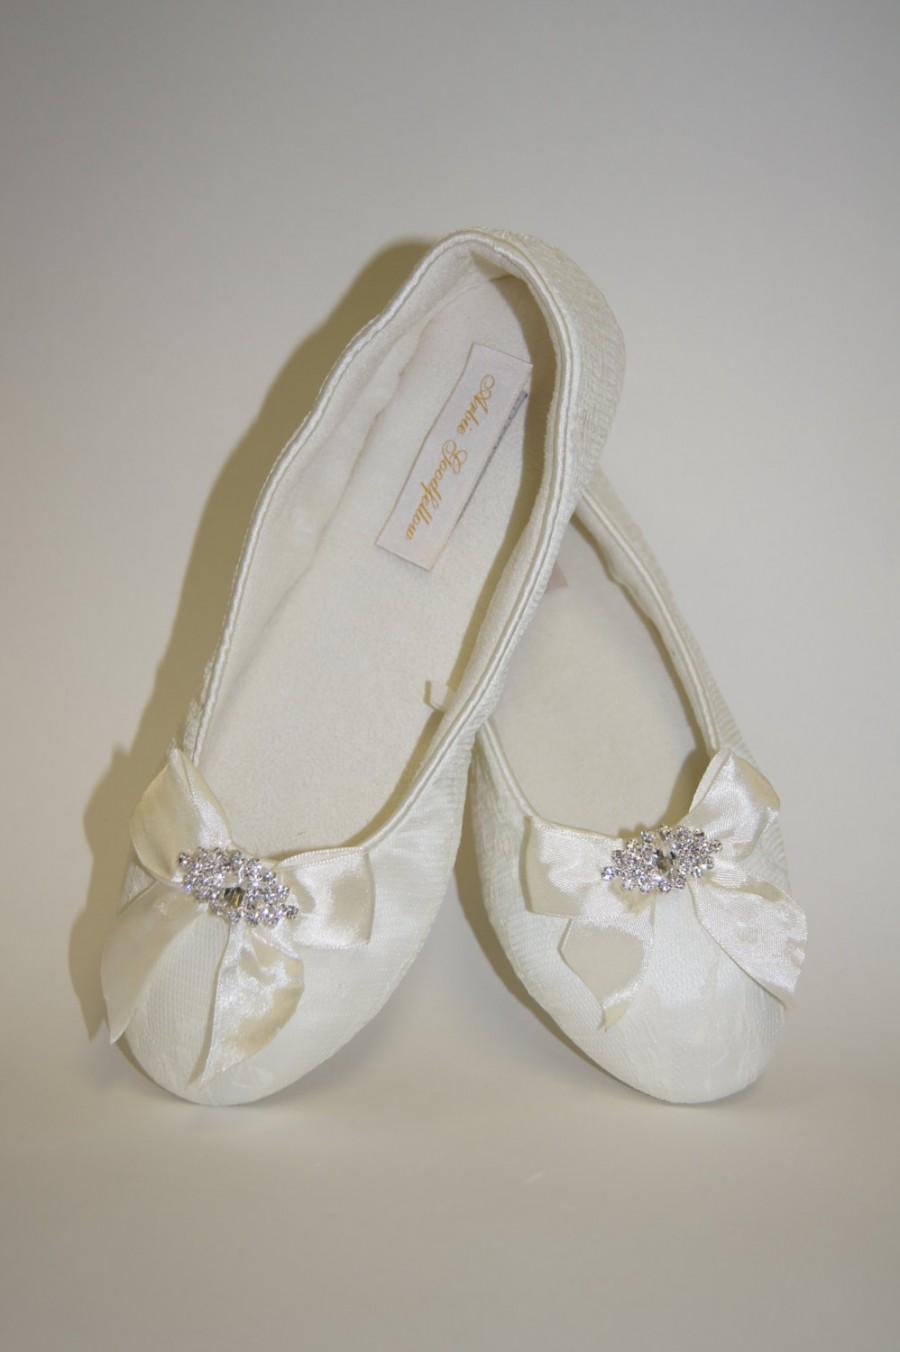 Mariage - Flat Lace Wedding Shoes - Choose From White Or Ivory Lace Flat Shoes - Ribbons And Crystals - Comfortable Flat Lace Wedding Shoes - Parisxox